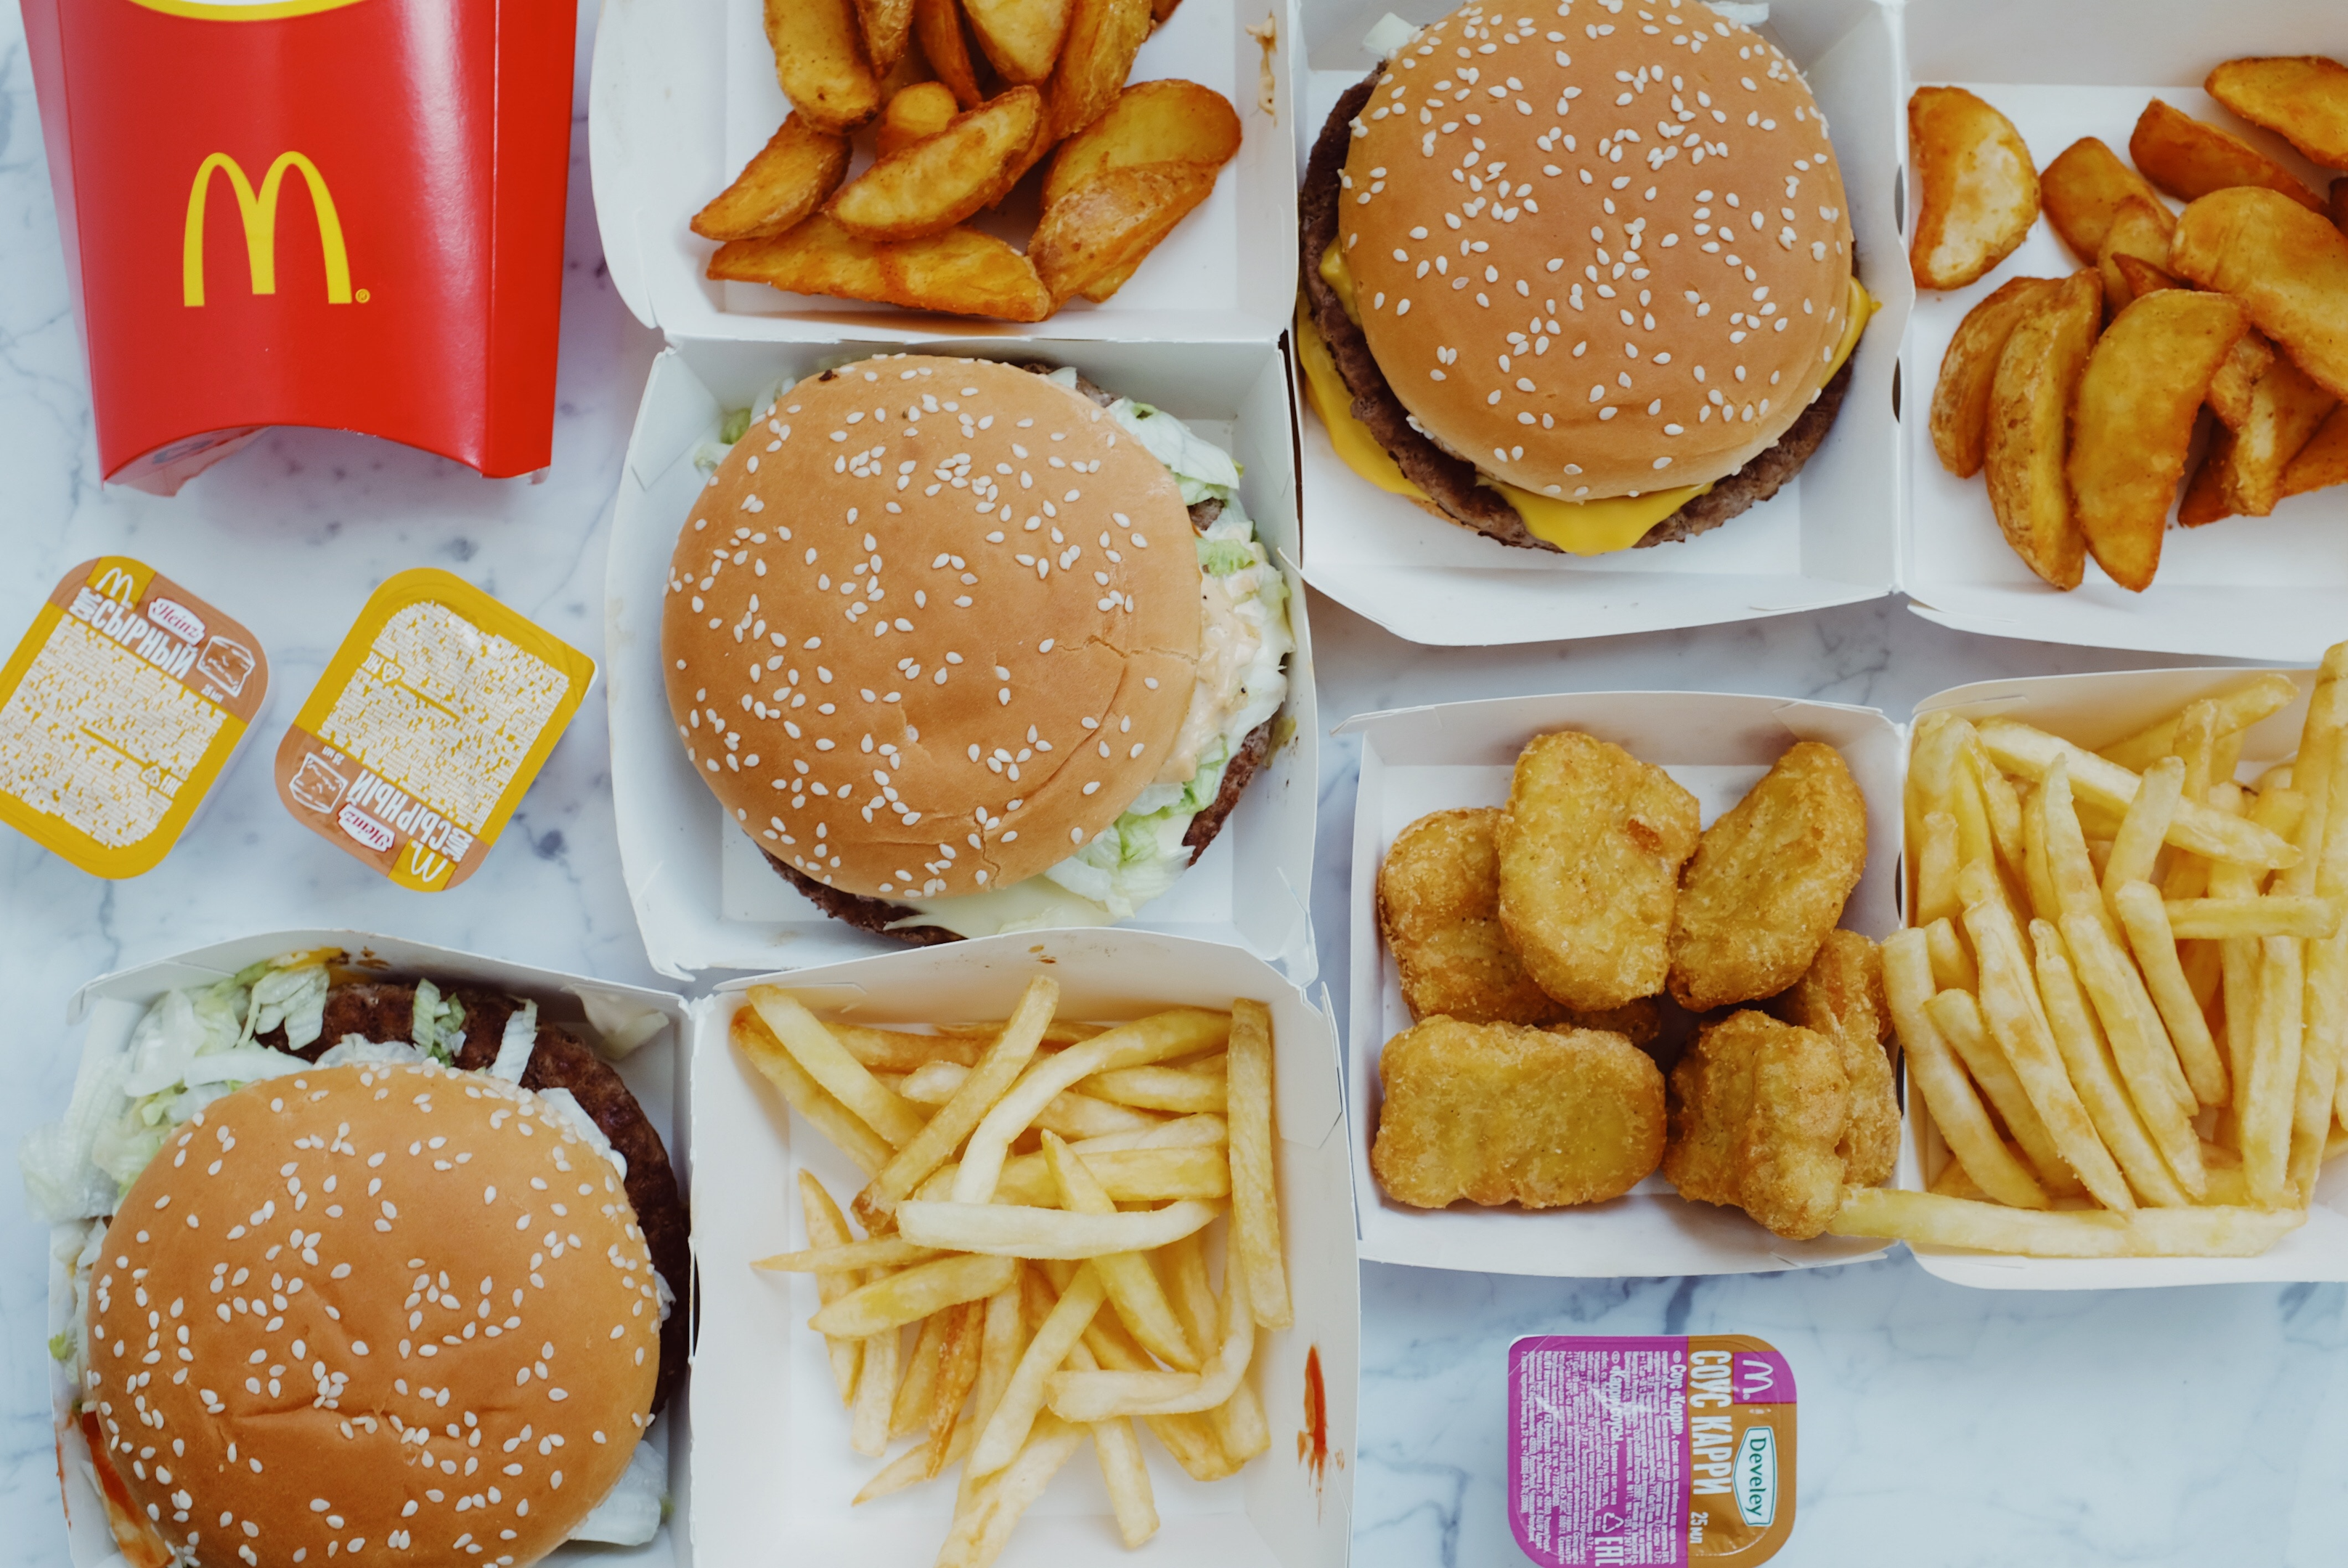 A table full of tasty fast food